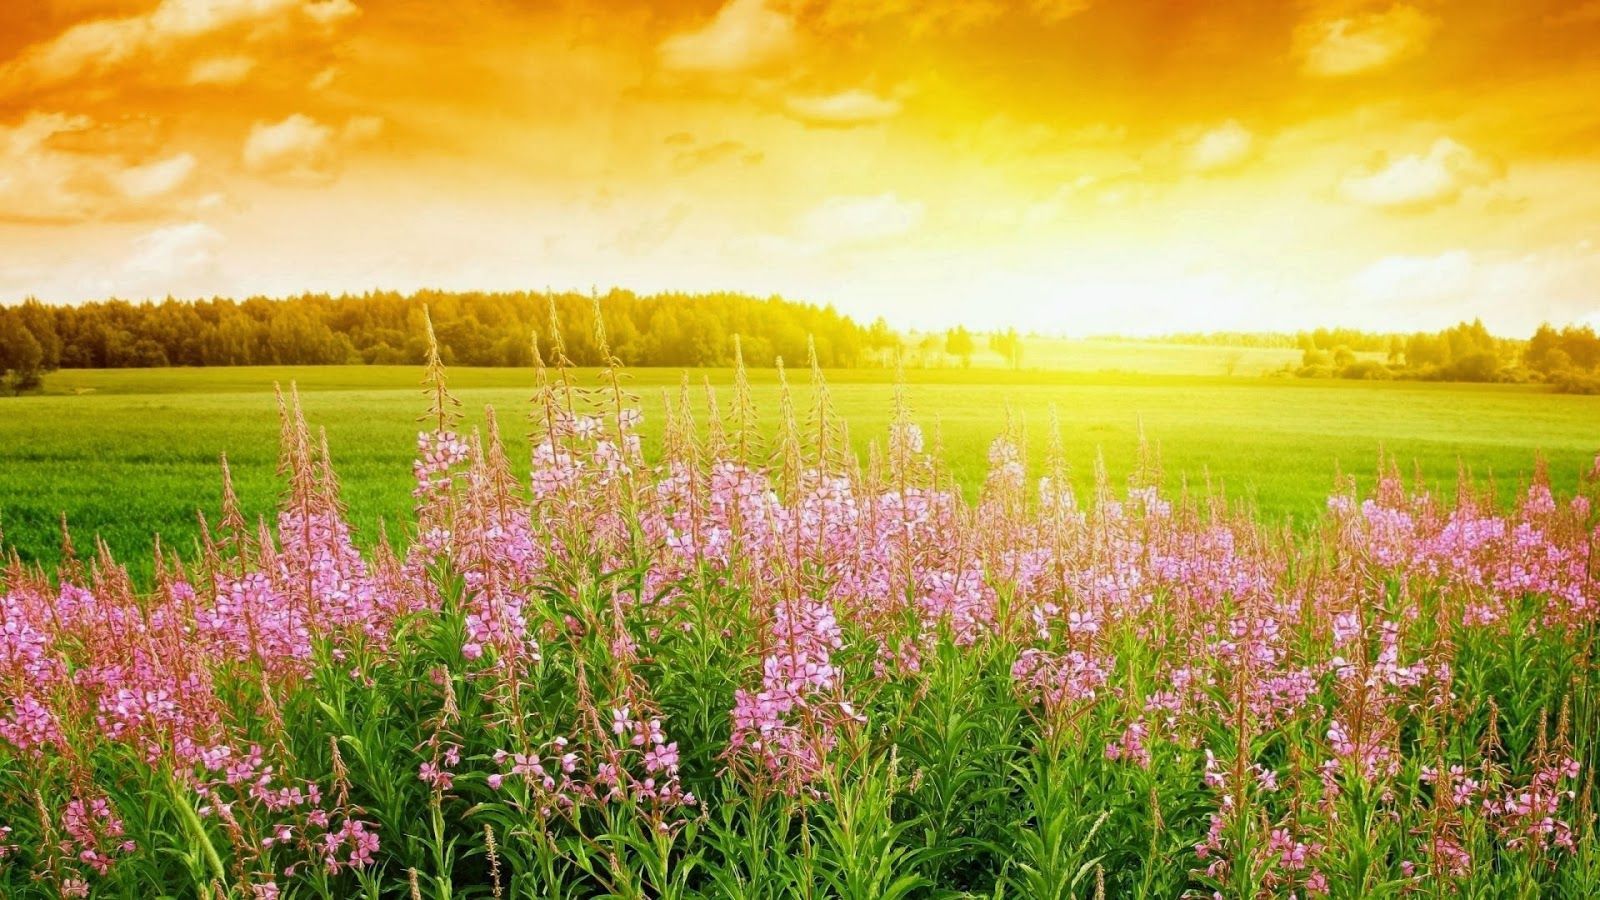 Hd Laptop Free Download, 21 May Background